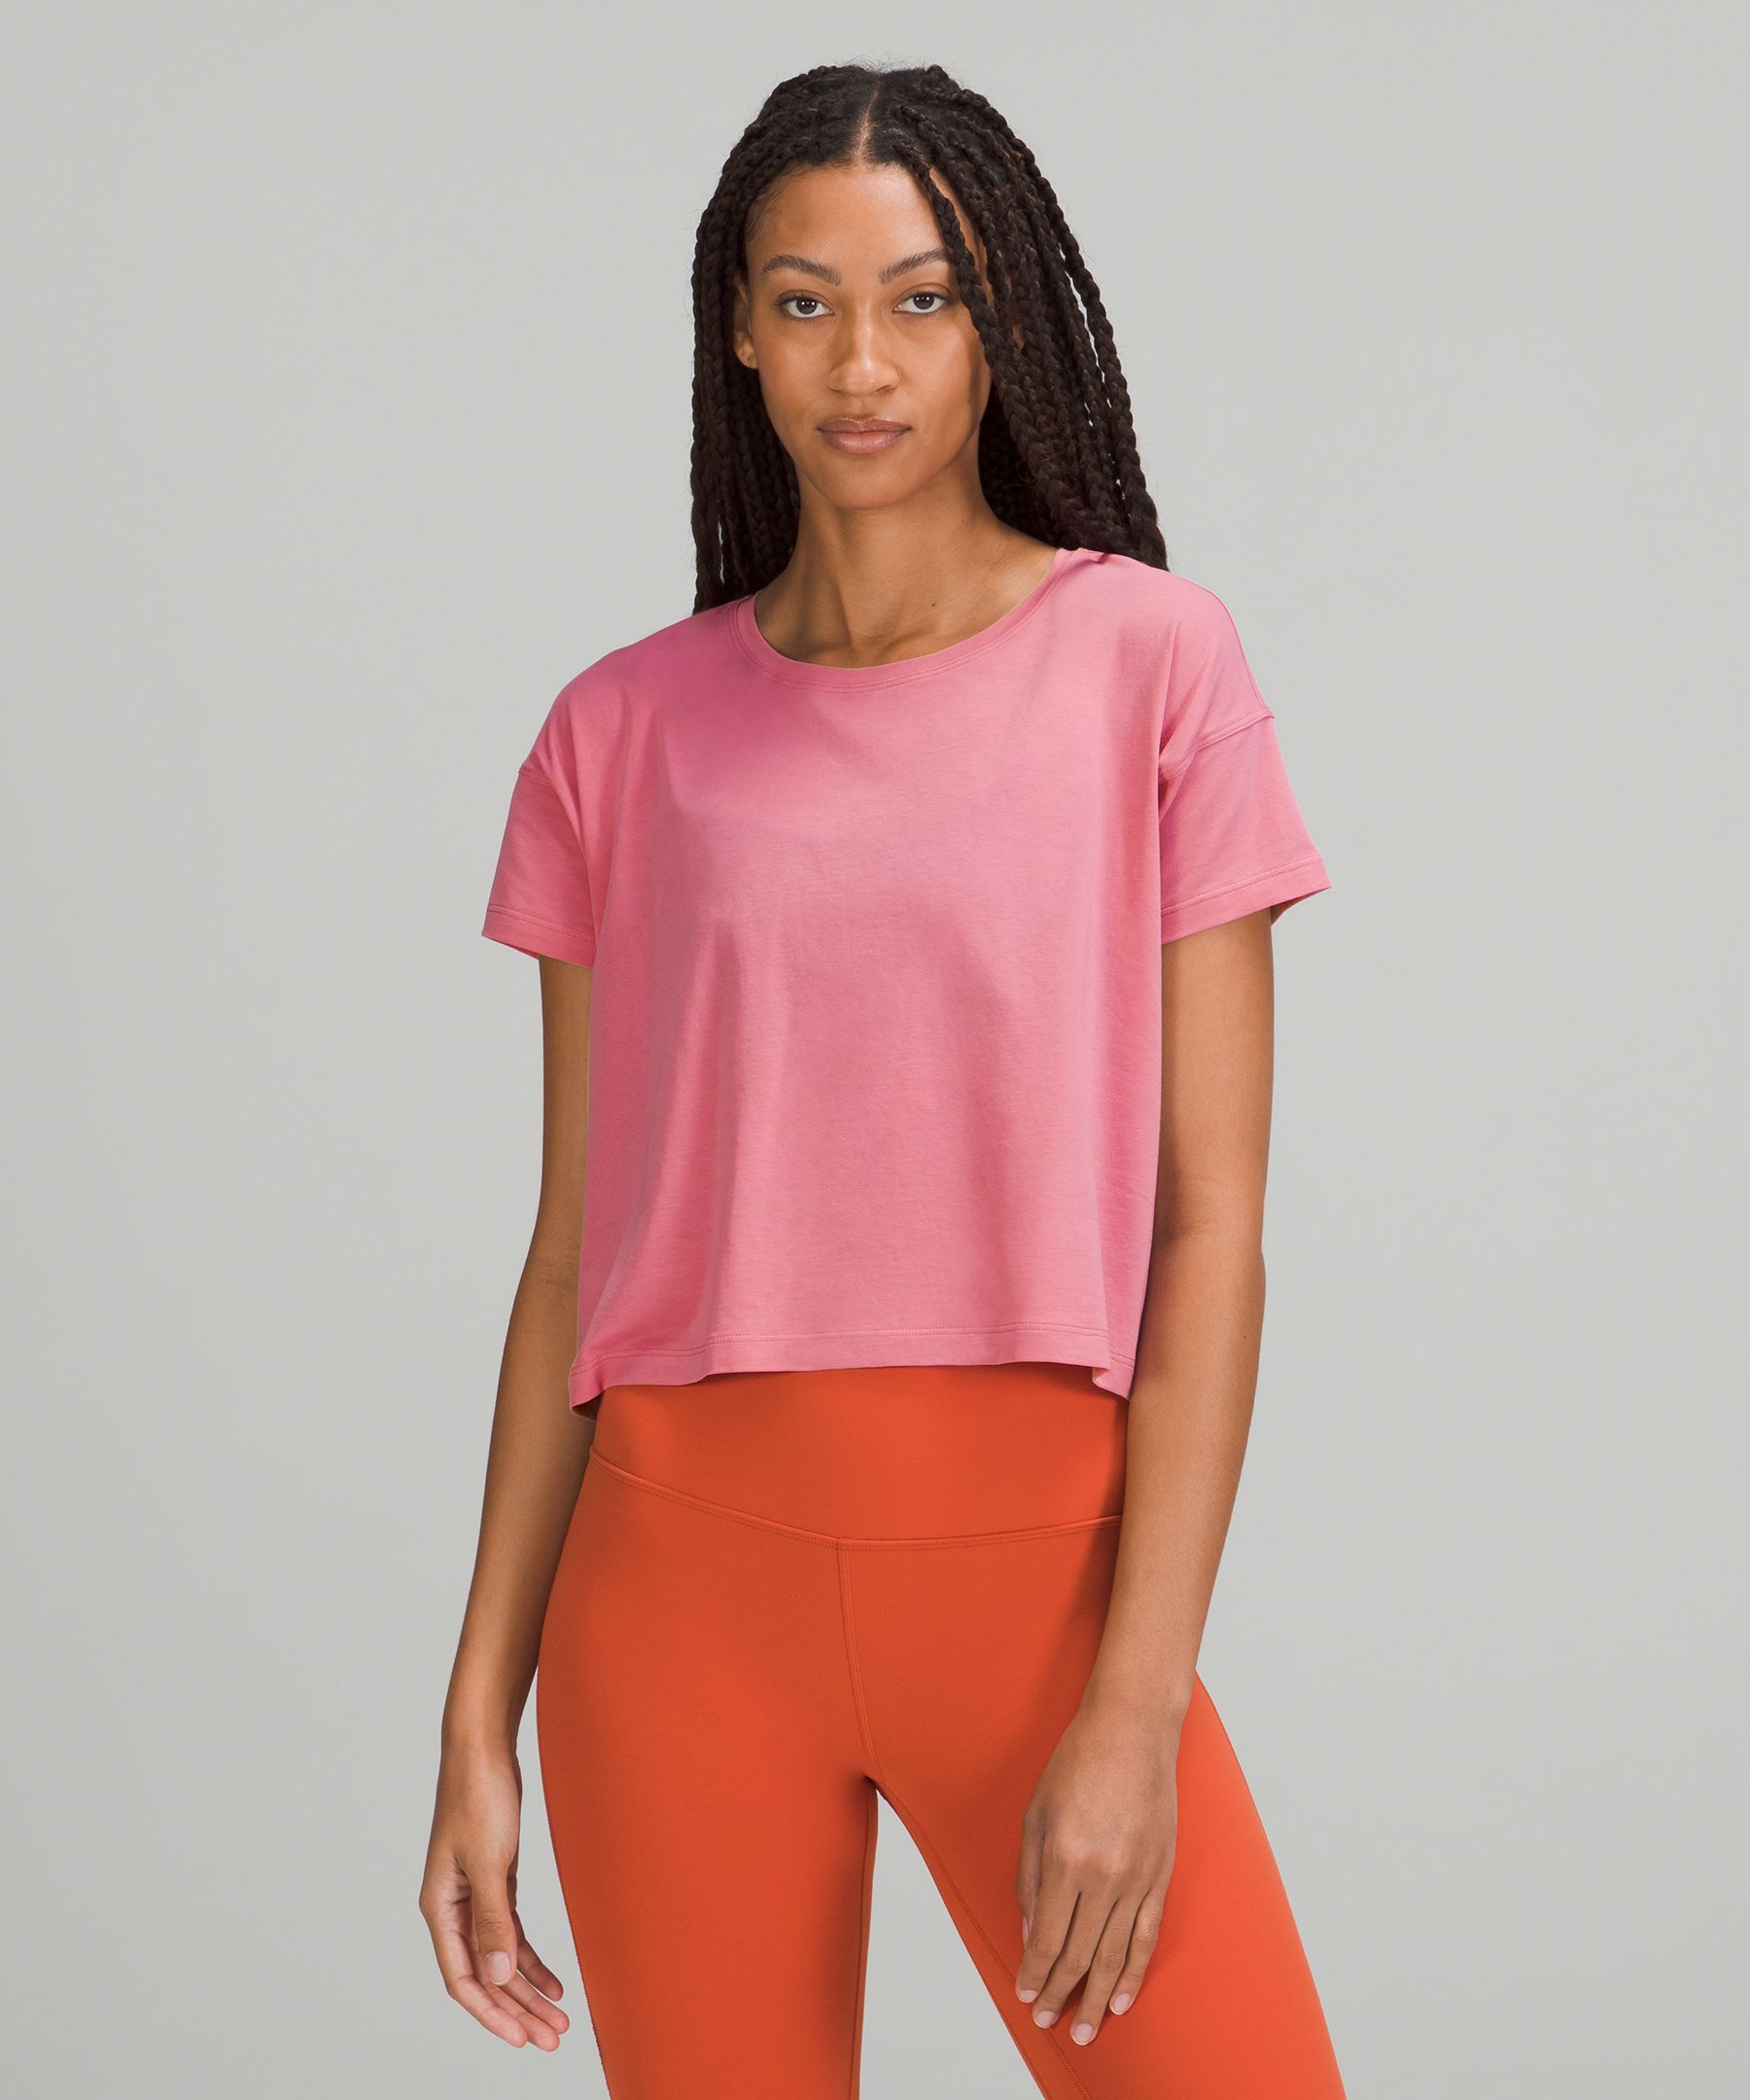 Lululemon Cates T-shirt In Pink Blossom